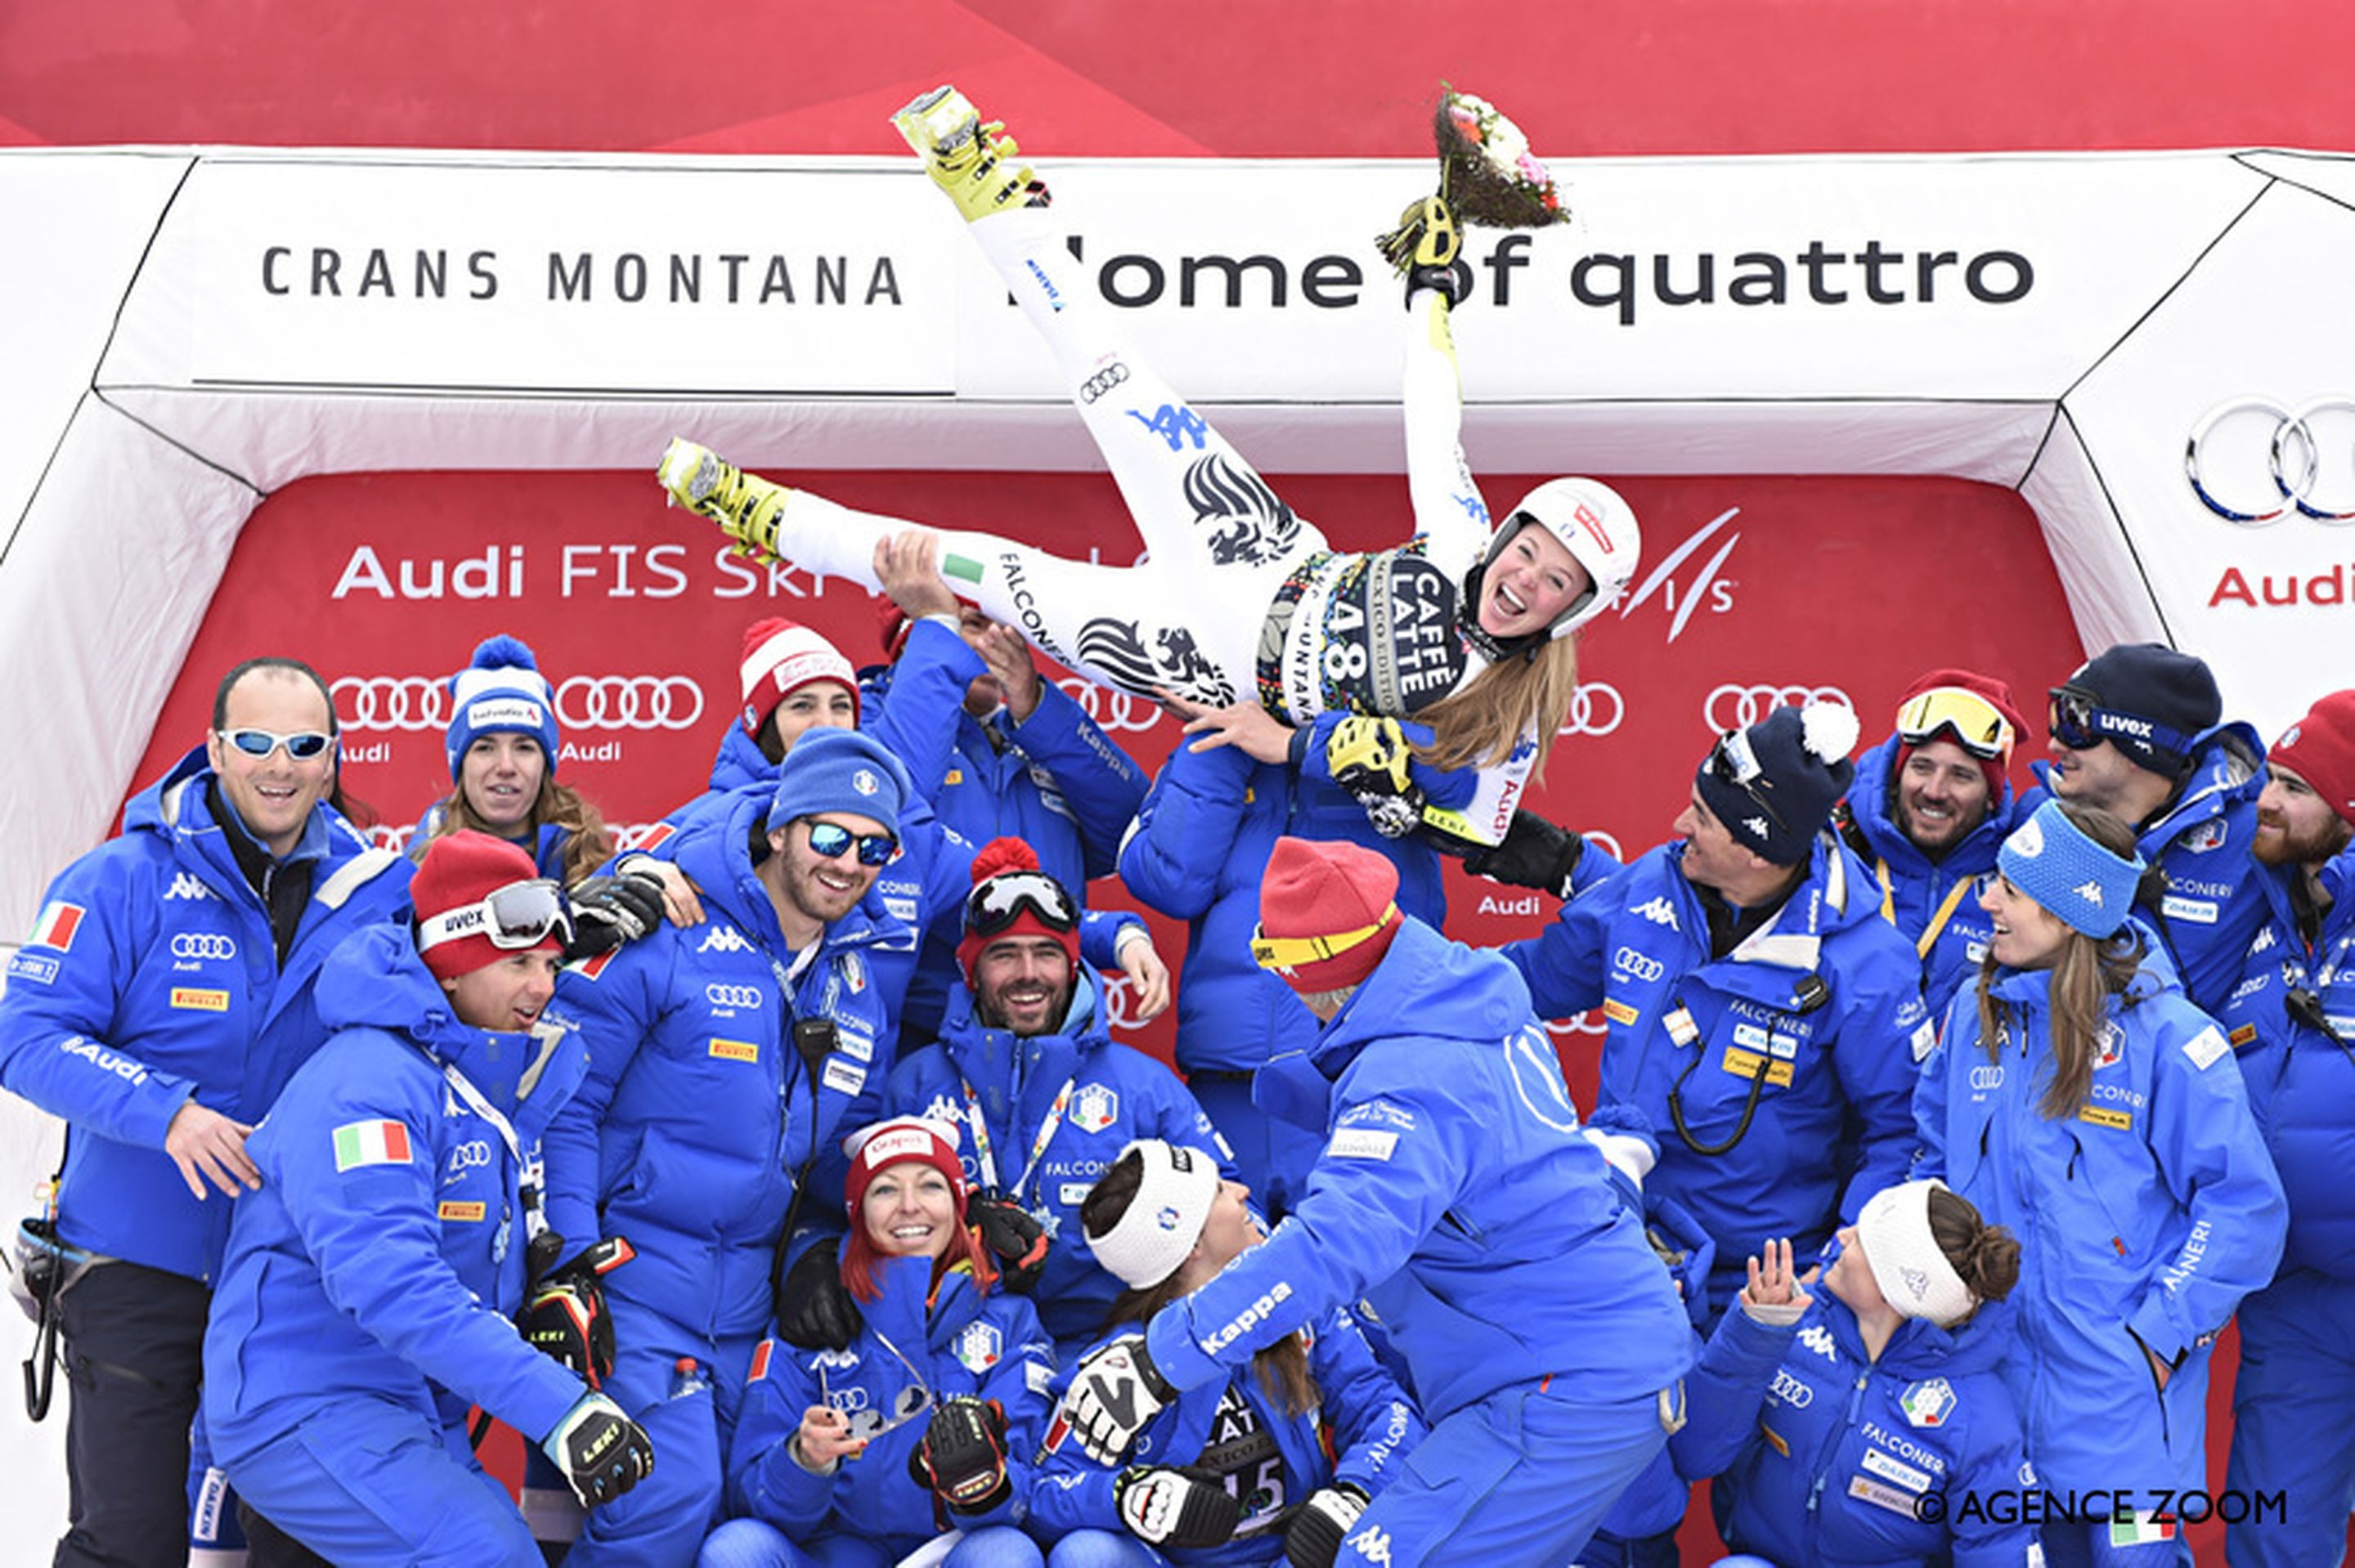 CRANS-MONTANA, SWITZERLAND - MARCH 03: Verena Stuffer of Italy celebrates her retirement during the Audi FIS Alpine Ski World Cup Women's Super G on March 3, 2018 in Crans-Montana, Switzerland. (Photo by Michel Cottin/Agence Zoom)